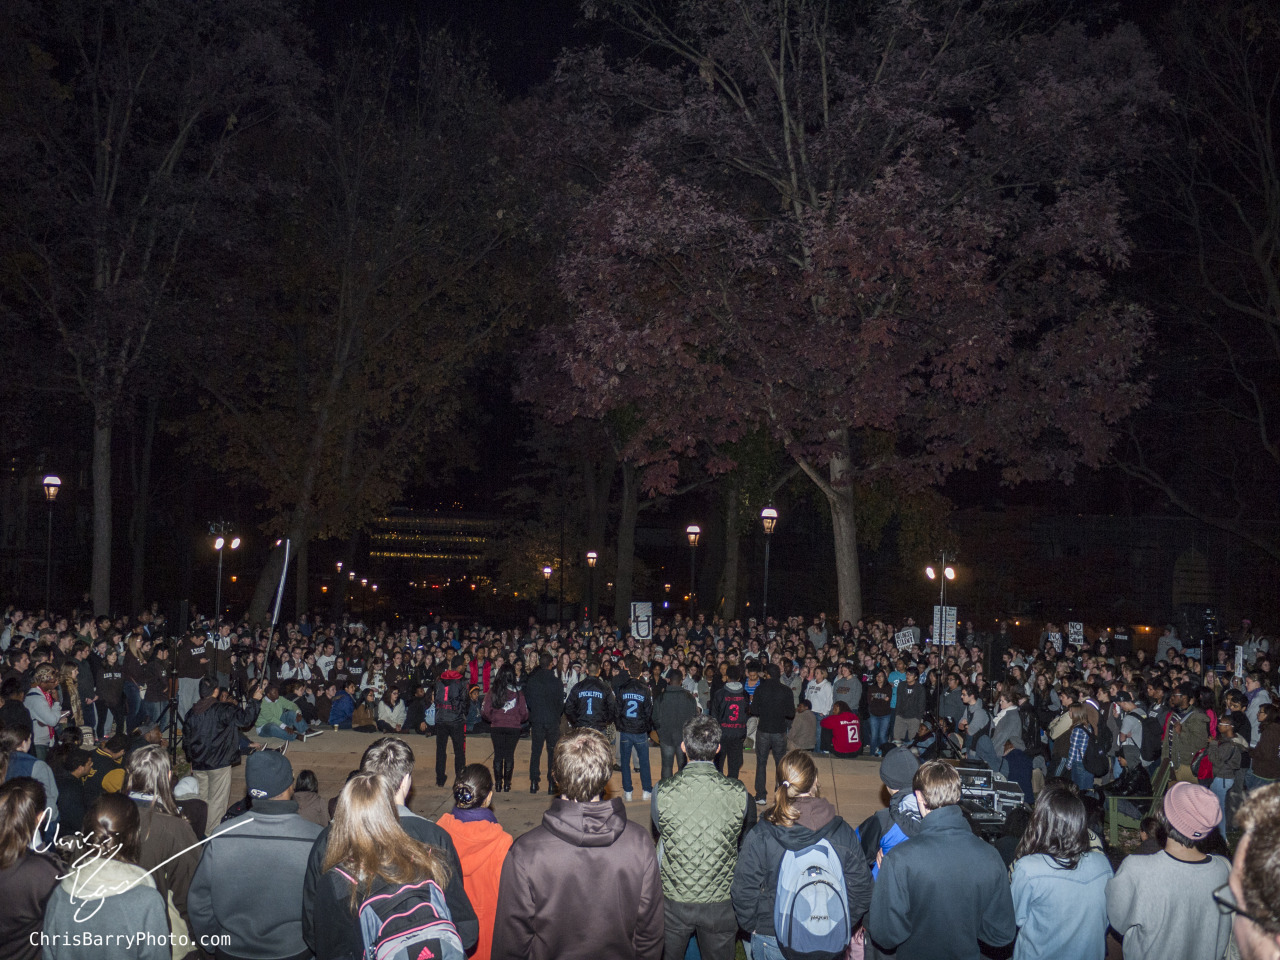 A picture demonstrating the turnout at the OneLehigh rally, which hundreds of students attended